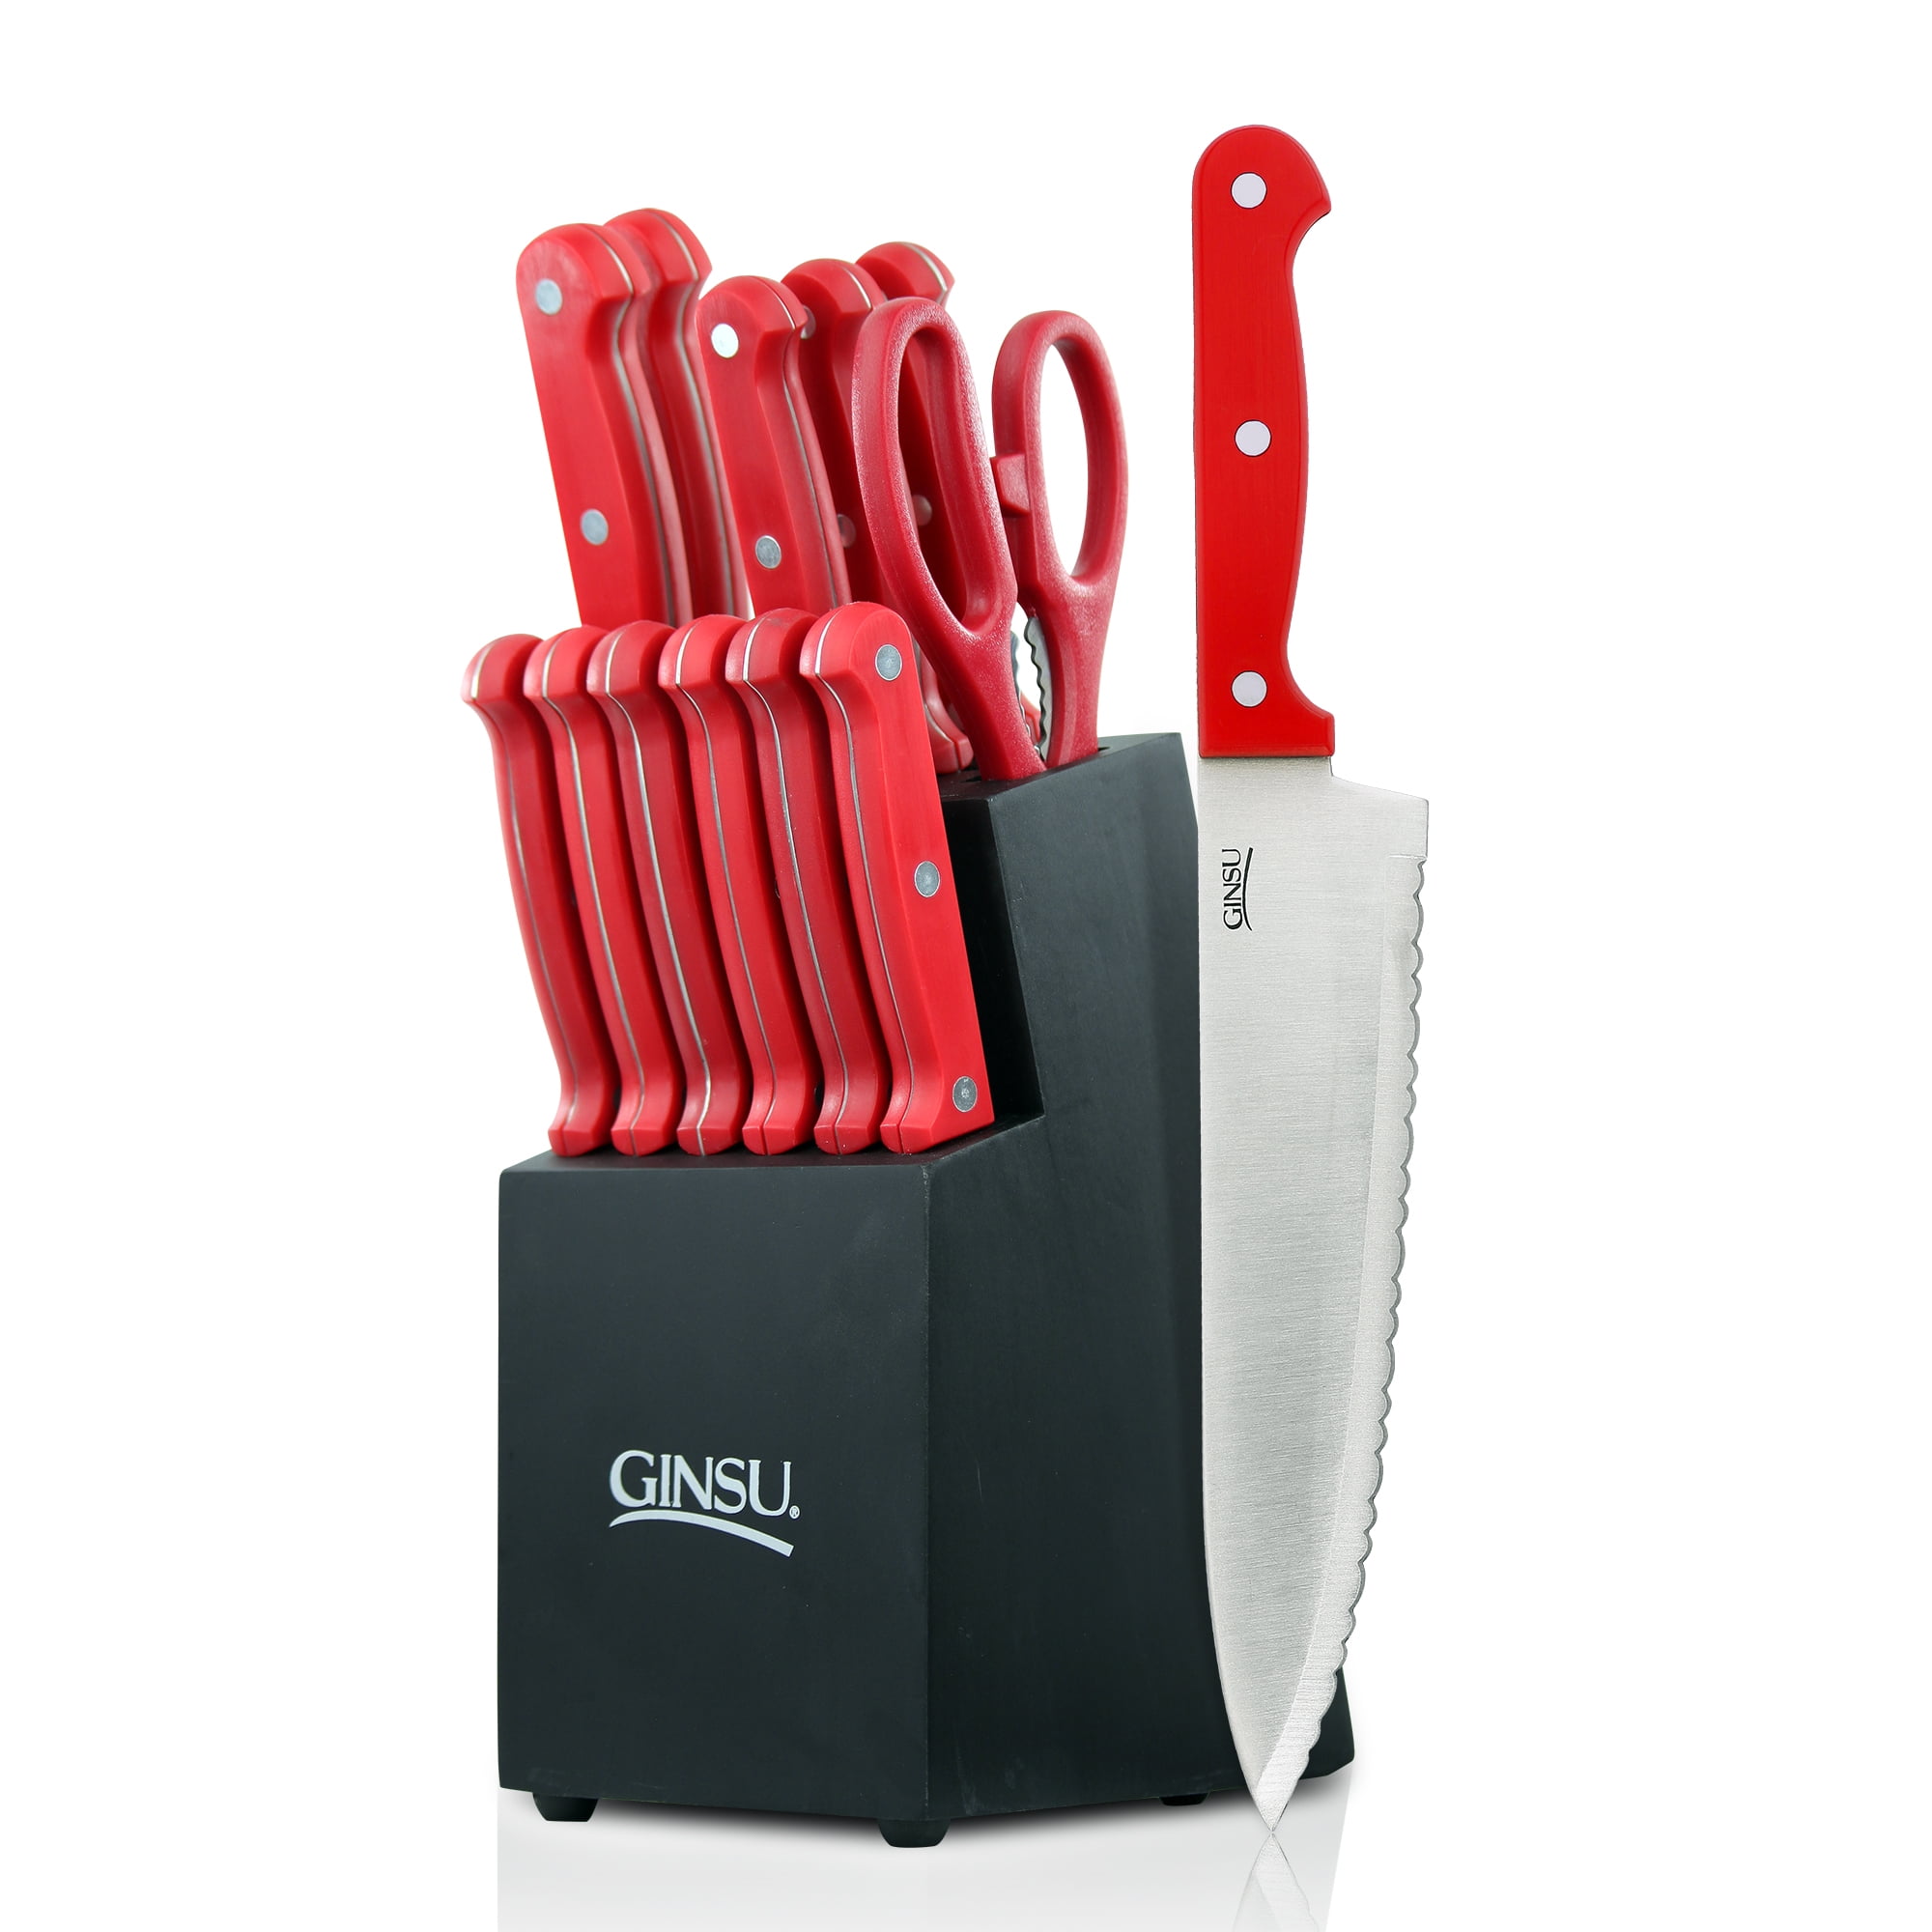  8-Piece Kitchen Knife Set With Rotary Stand, Sharpener,  Scissors, Stainless Steel Knife Sets with Hollow Horseshoe Handle,  Wear-Resistant and Durable (Red): Home & Kitchen